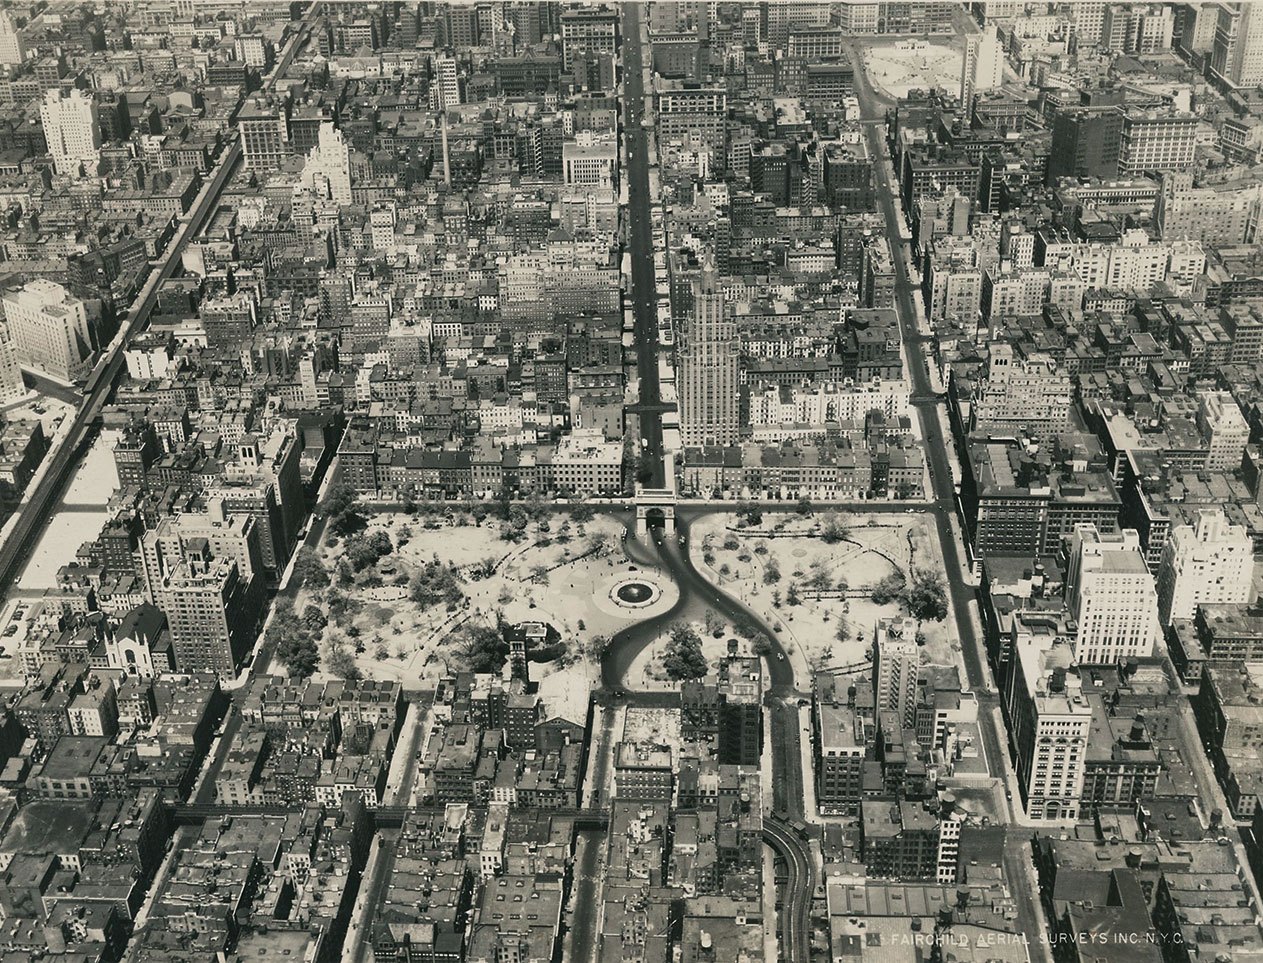 A throwback of an aerial view of Washington Square Park and its surrounding streets.